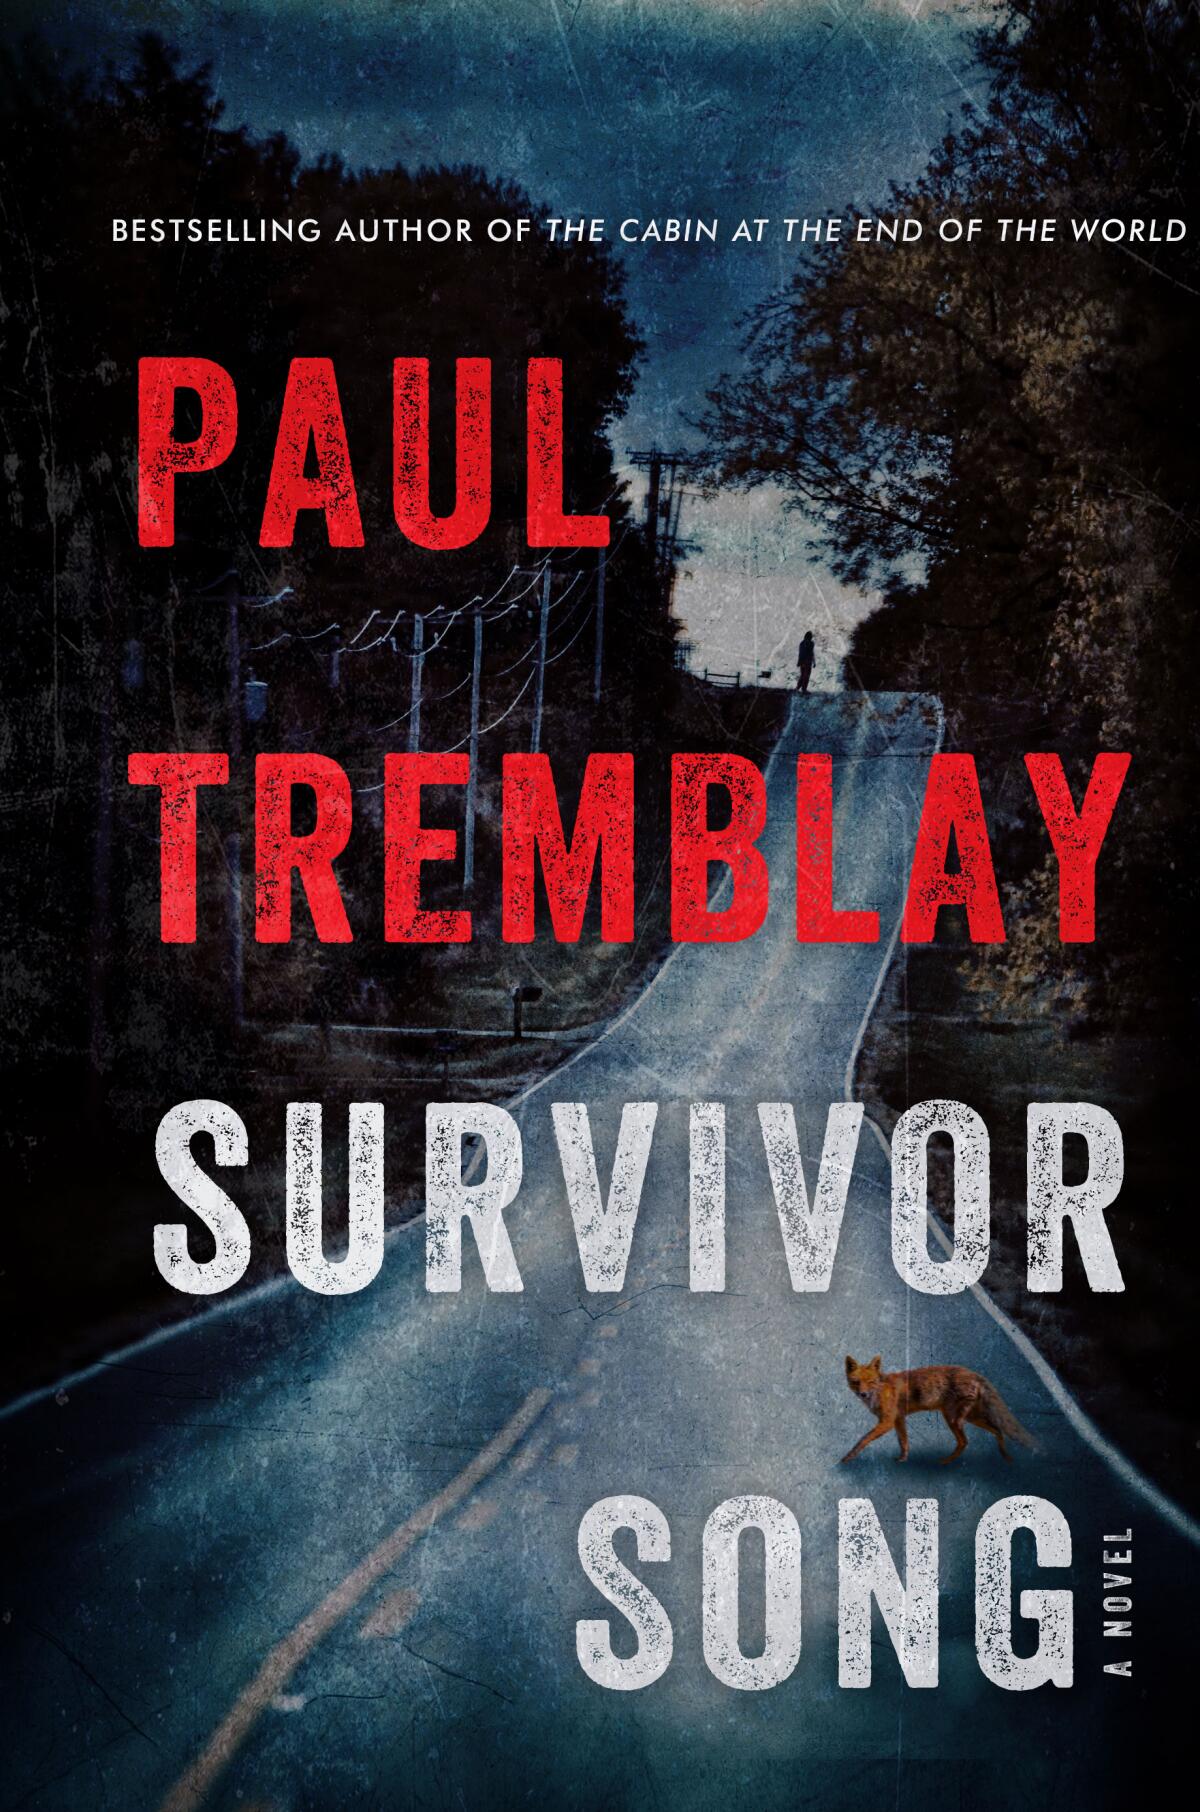 The book jacket for Paul Tremblay's "Survivor Song." 